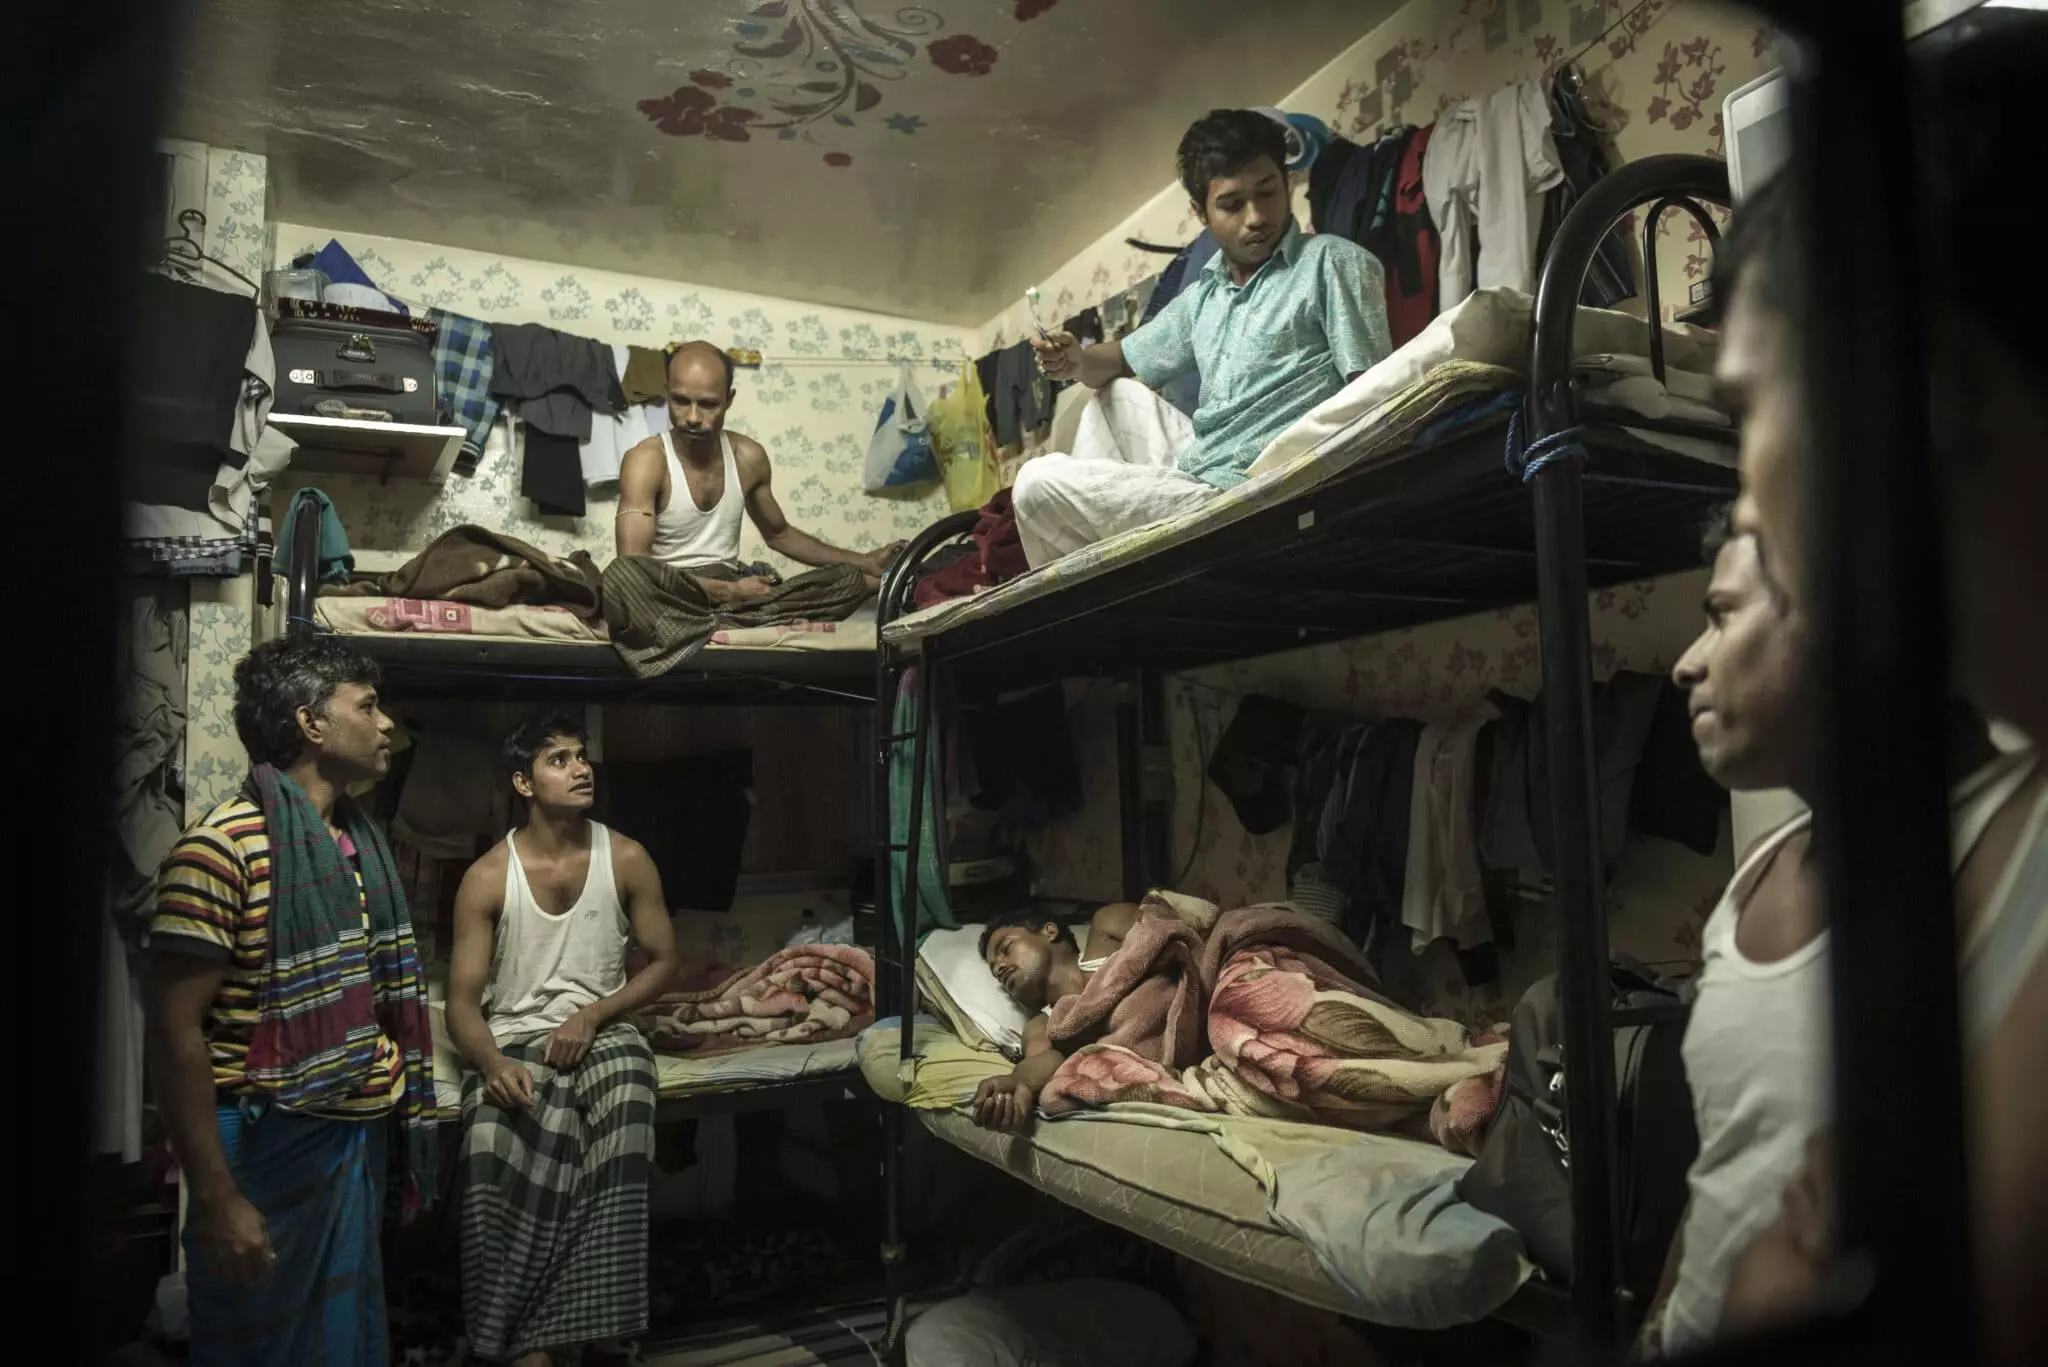 UAE migrant workers accommodation